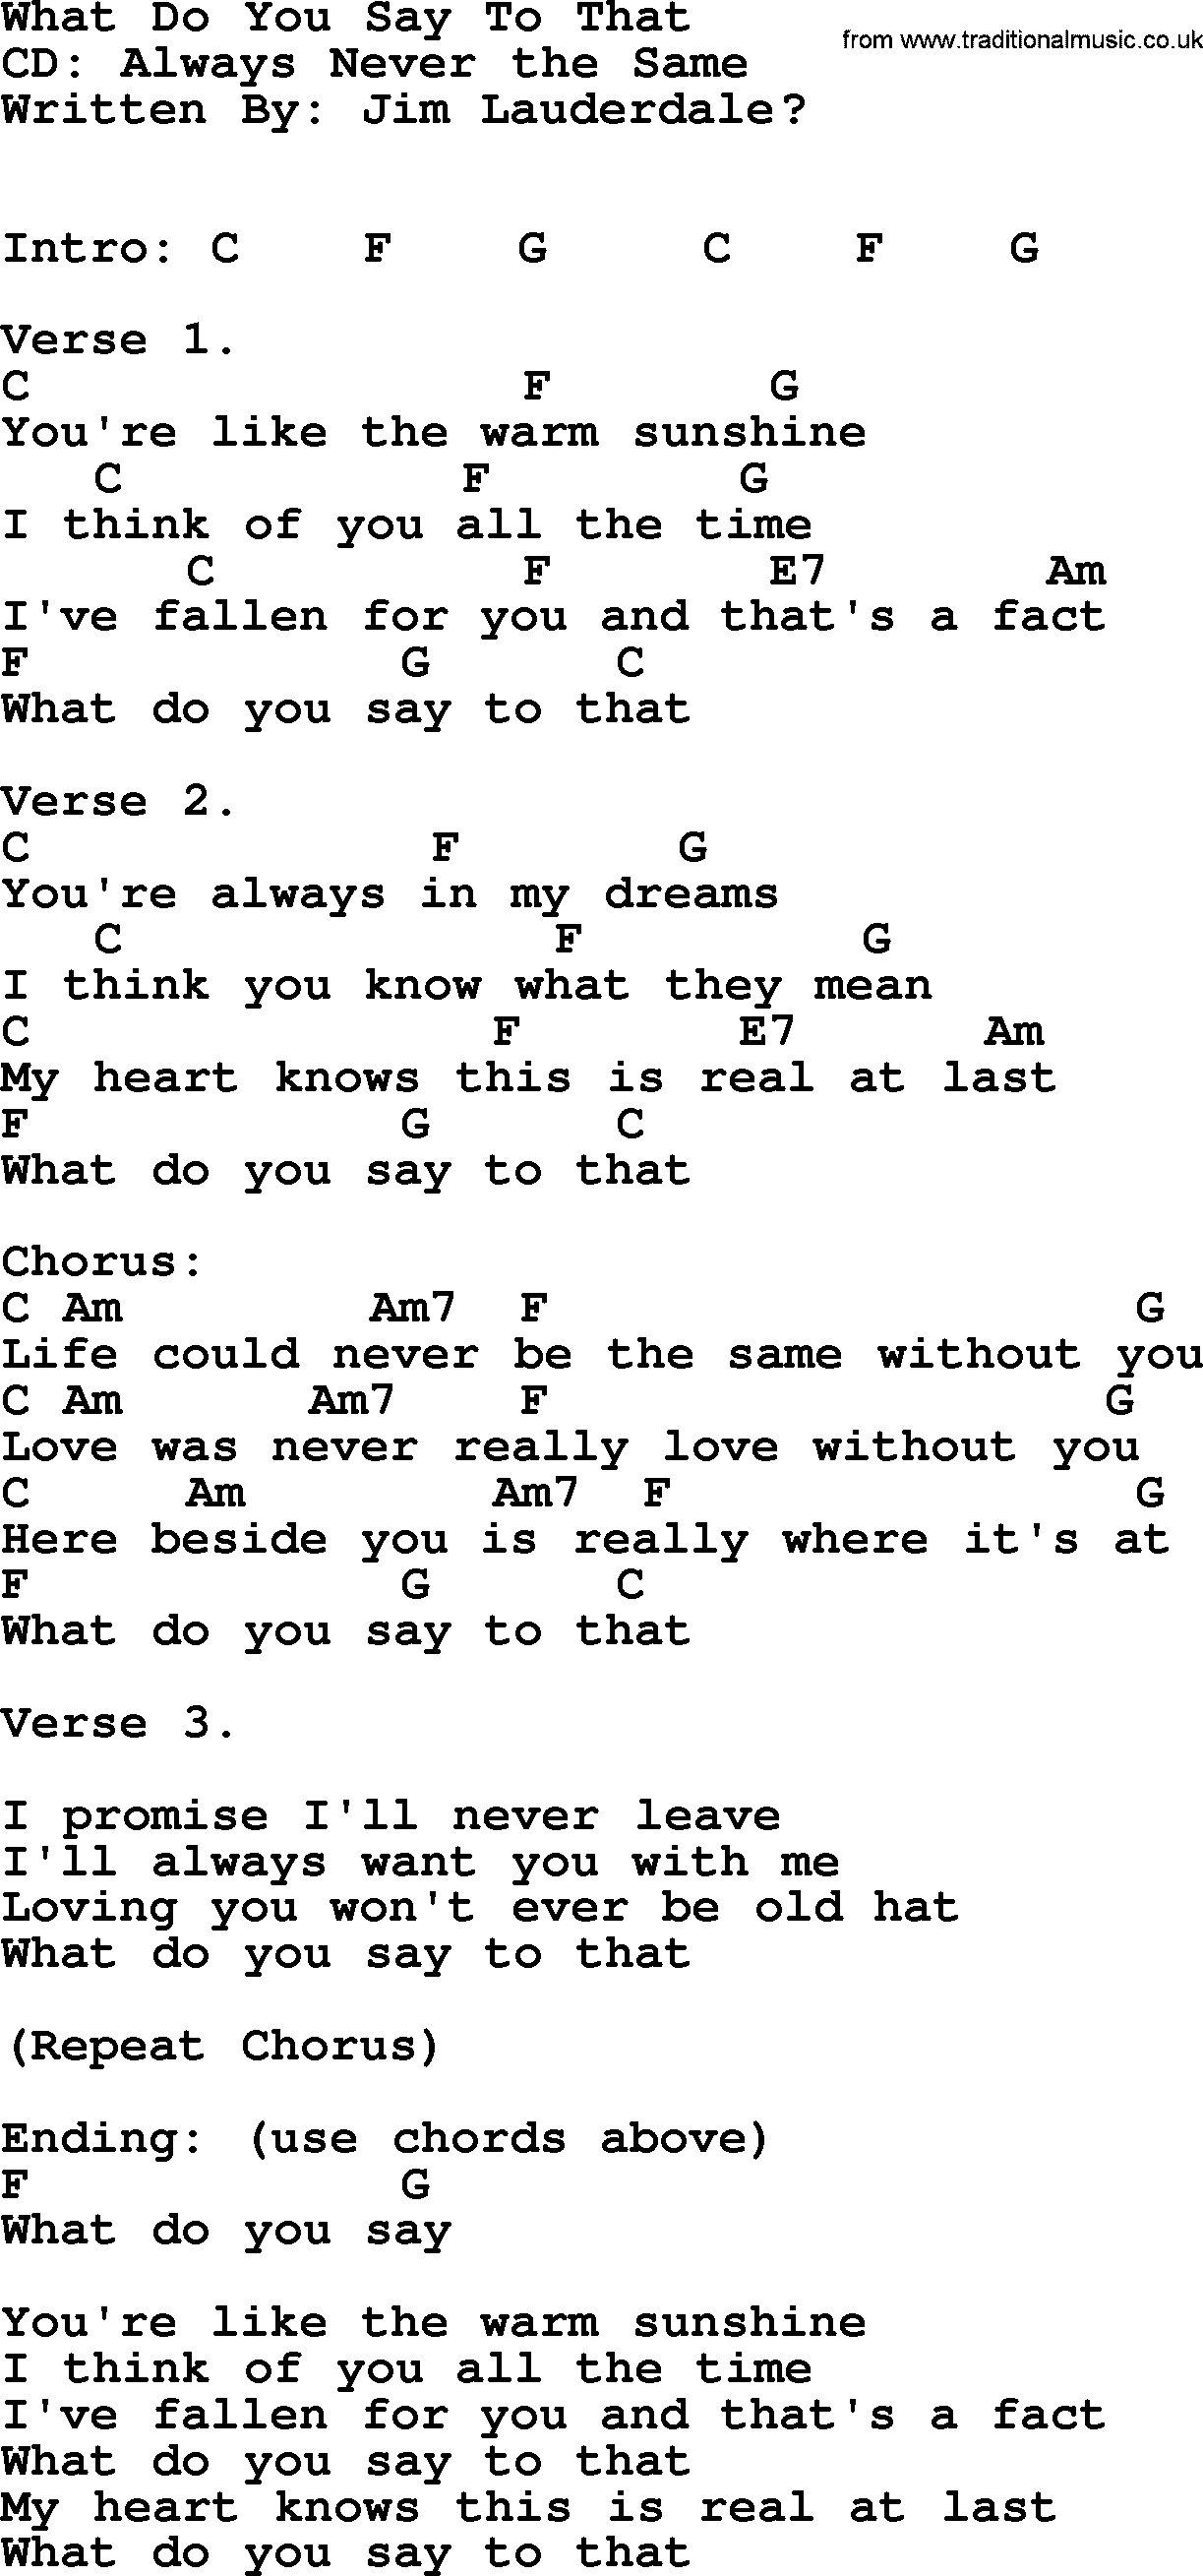 George Strait song: What Do You Say To That, lyrics and chords